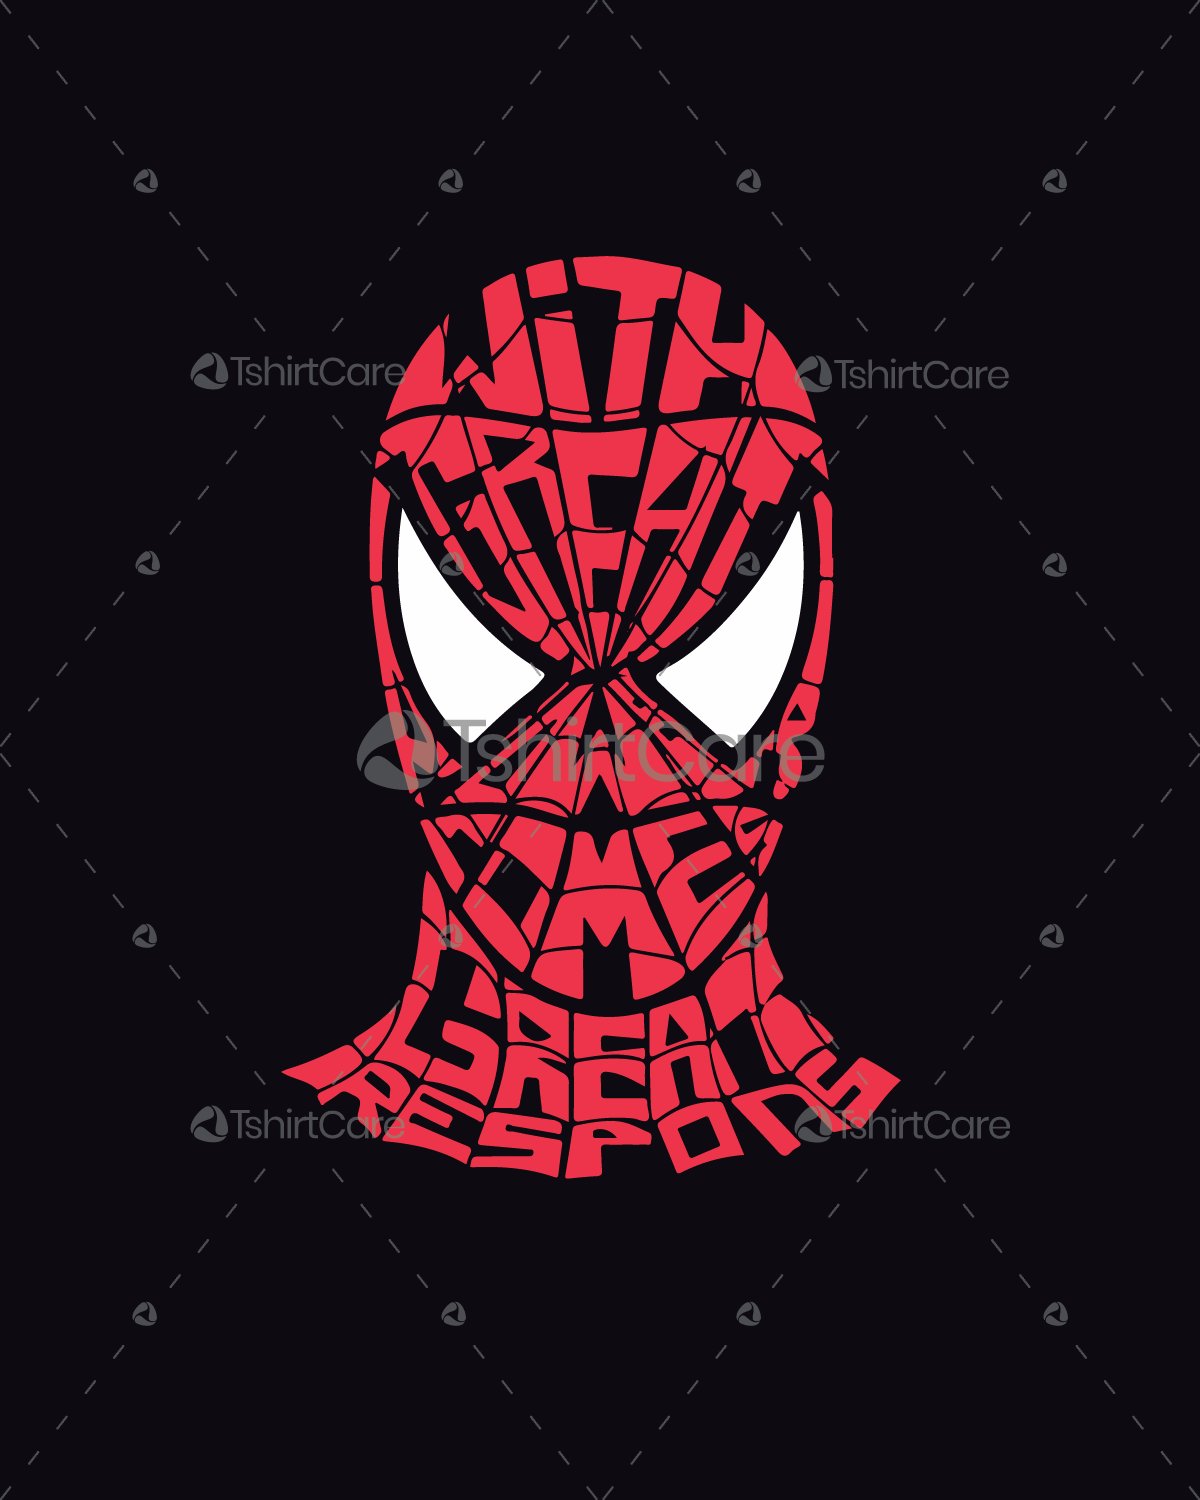 Spiderman face T shirt Design Marvel Superhero Graphic Tee Shirts for Movie  Lovers - TshirtCare